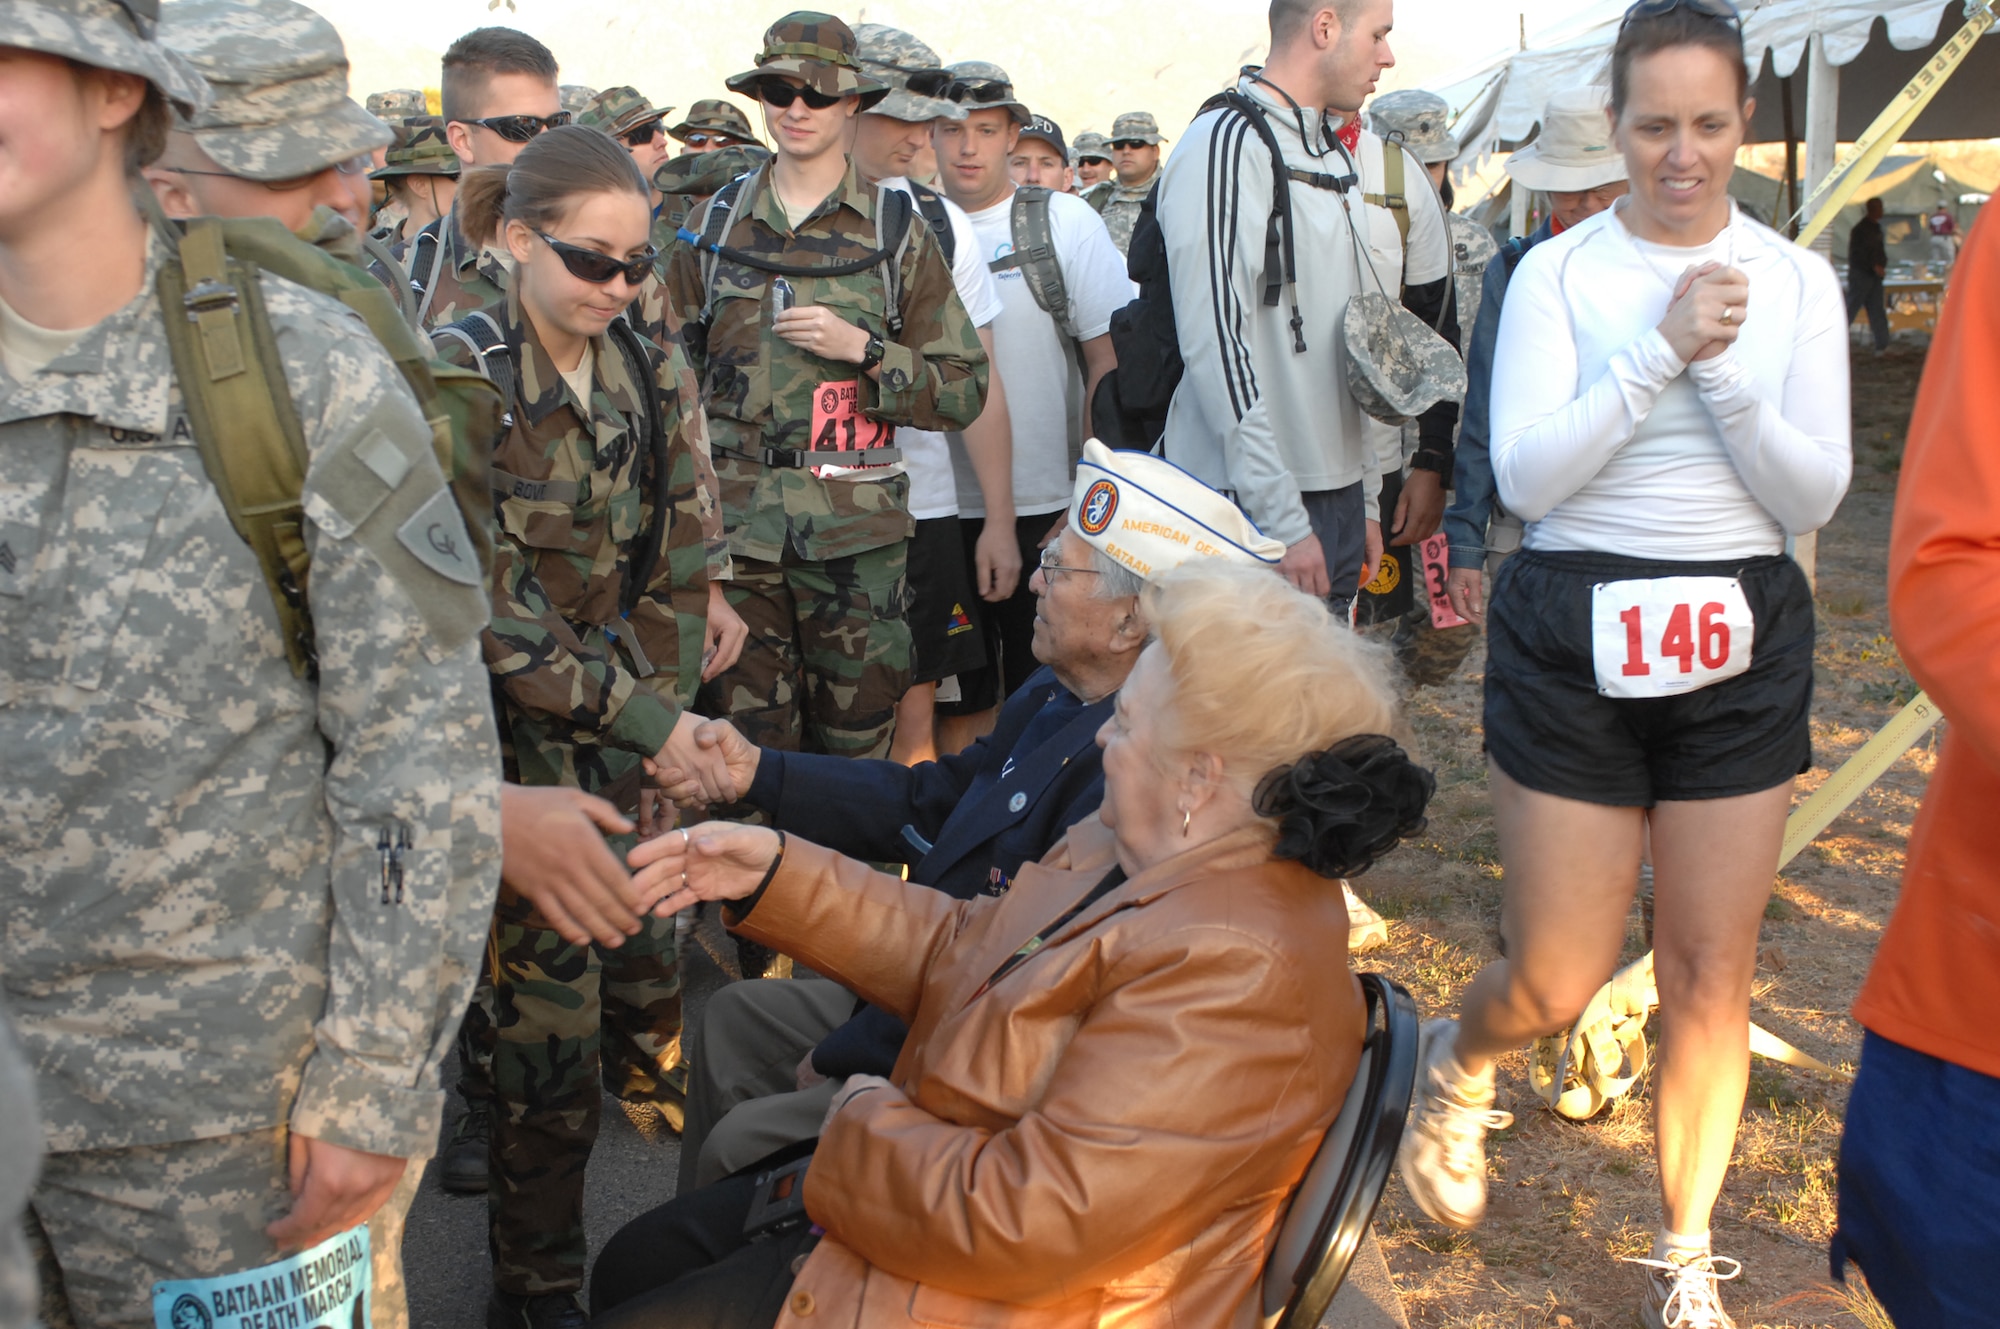 WHITE SANDS MISSILE RANGE, N.M. -- Battaan Death March survivor Carlos Montoya shakes hands with some of the more than 4,400 participants in the 19th Annual Bataan Death March Memorial Run on March 30. Military units from all 50 states as well as more than a dozen foreign countries gathered to honor the men who endured the death march in 1942 and prisoner of war hardships until 1945. (Air Force photo/Greg Allen)